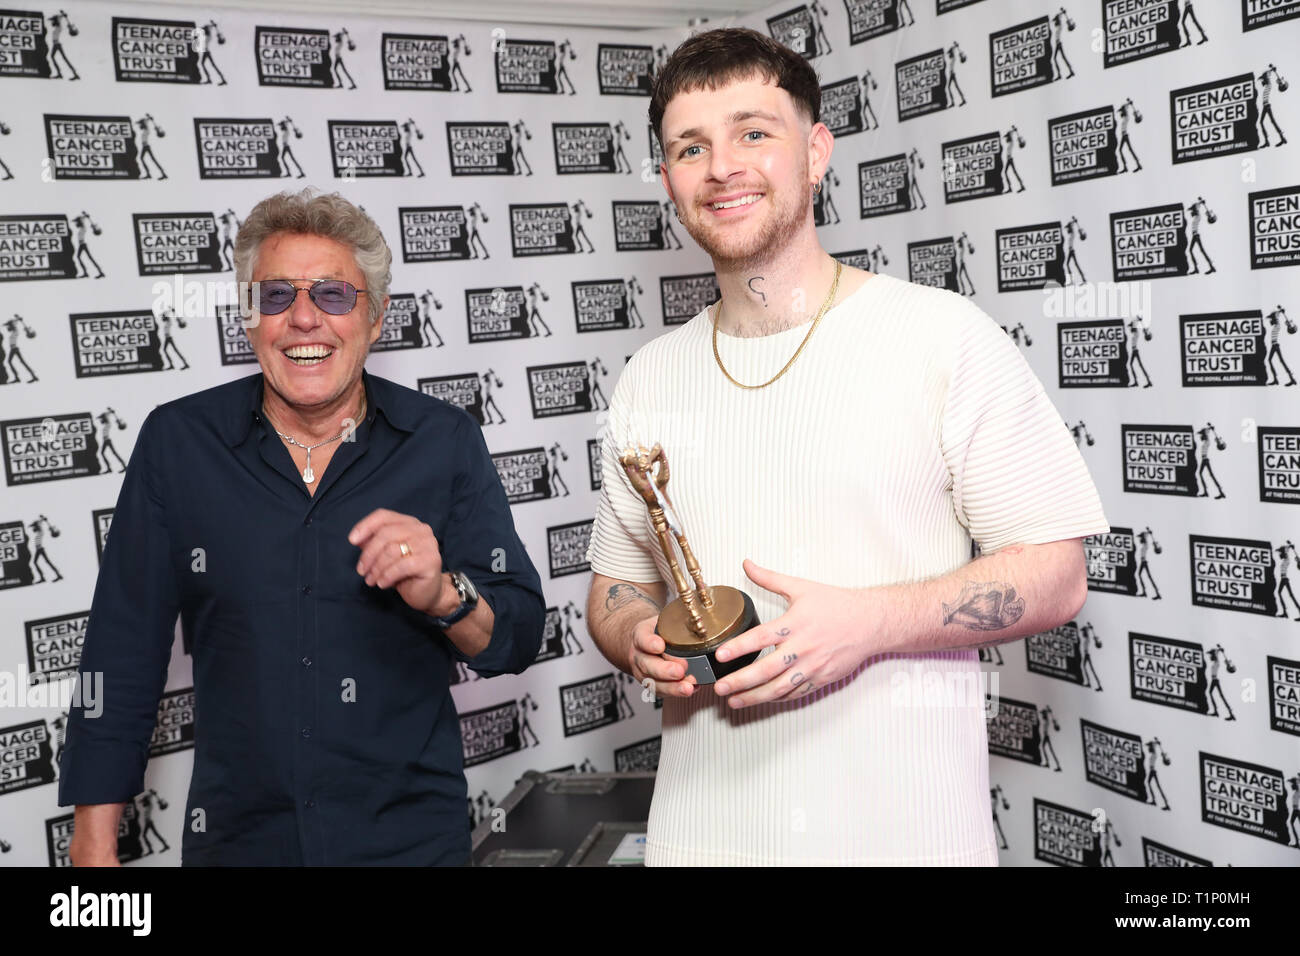 TCT's Honorary Patron Roger Daltrey CBE gives an award to Tom Grennan ahead of his performance at the Teenage Cancer Trust Concert, Royal Albert Hall, London. PRESS ASSOCIATION. Picture date: Wednesday March 27, 2019. See PA story SHOWBIZ TCT. Photo credit should read: Isabel Infantes/PA Wire Stock Photo